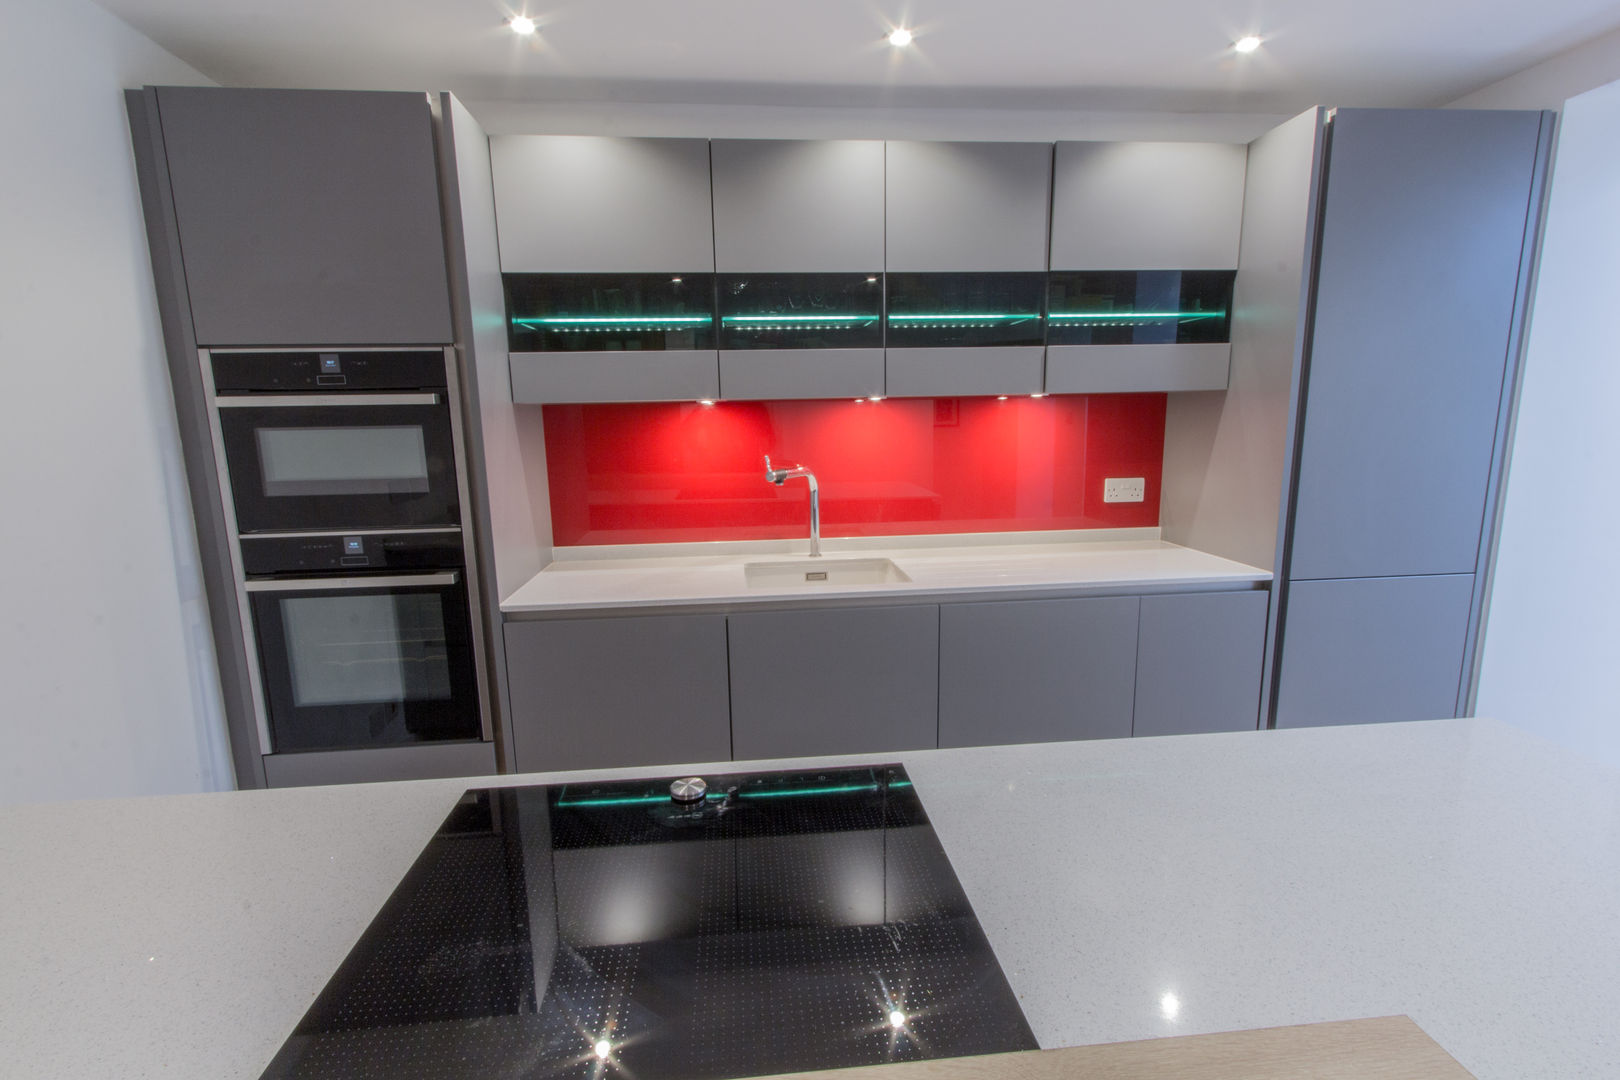 Grey & Red Eco German Kitchens Cozinhas modernas MDF Nobilia,Twinkle White worktops,Neff oven,Neff combination microwave,Blanco sink and tap,Neff Induction hob,open plan galley style kitchen,glazed wall units